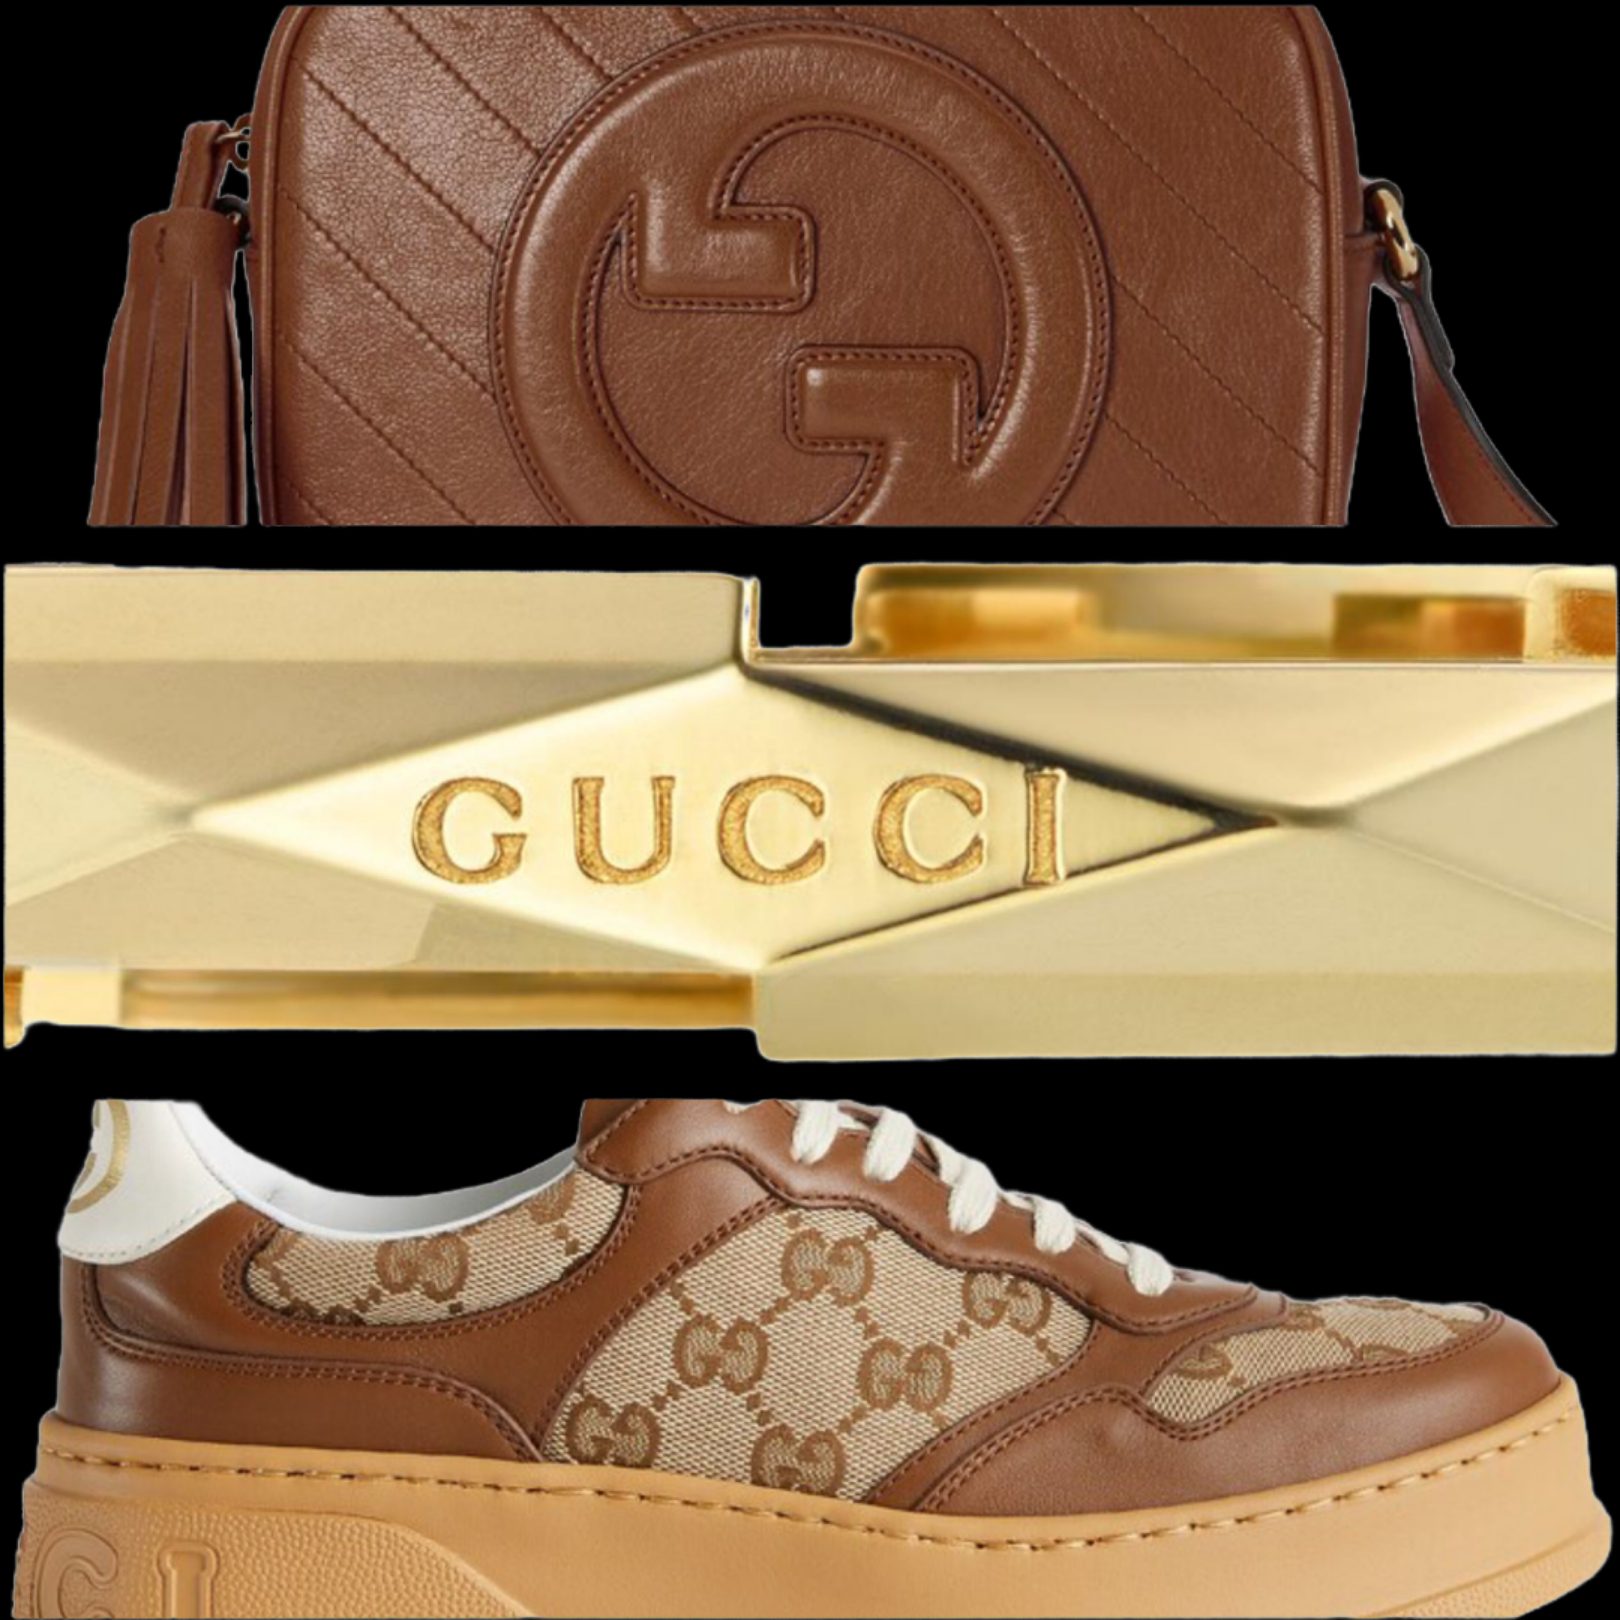 Gucci Mother's Day selection via 360 MAGAZINE.  